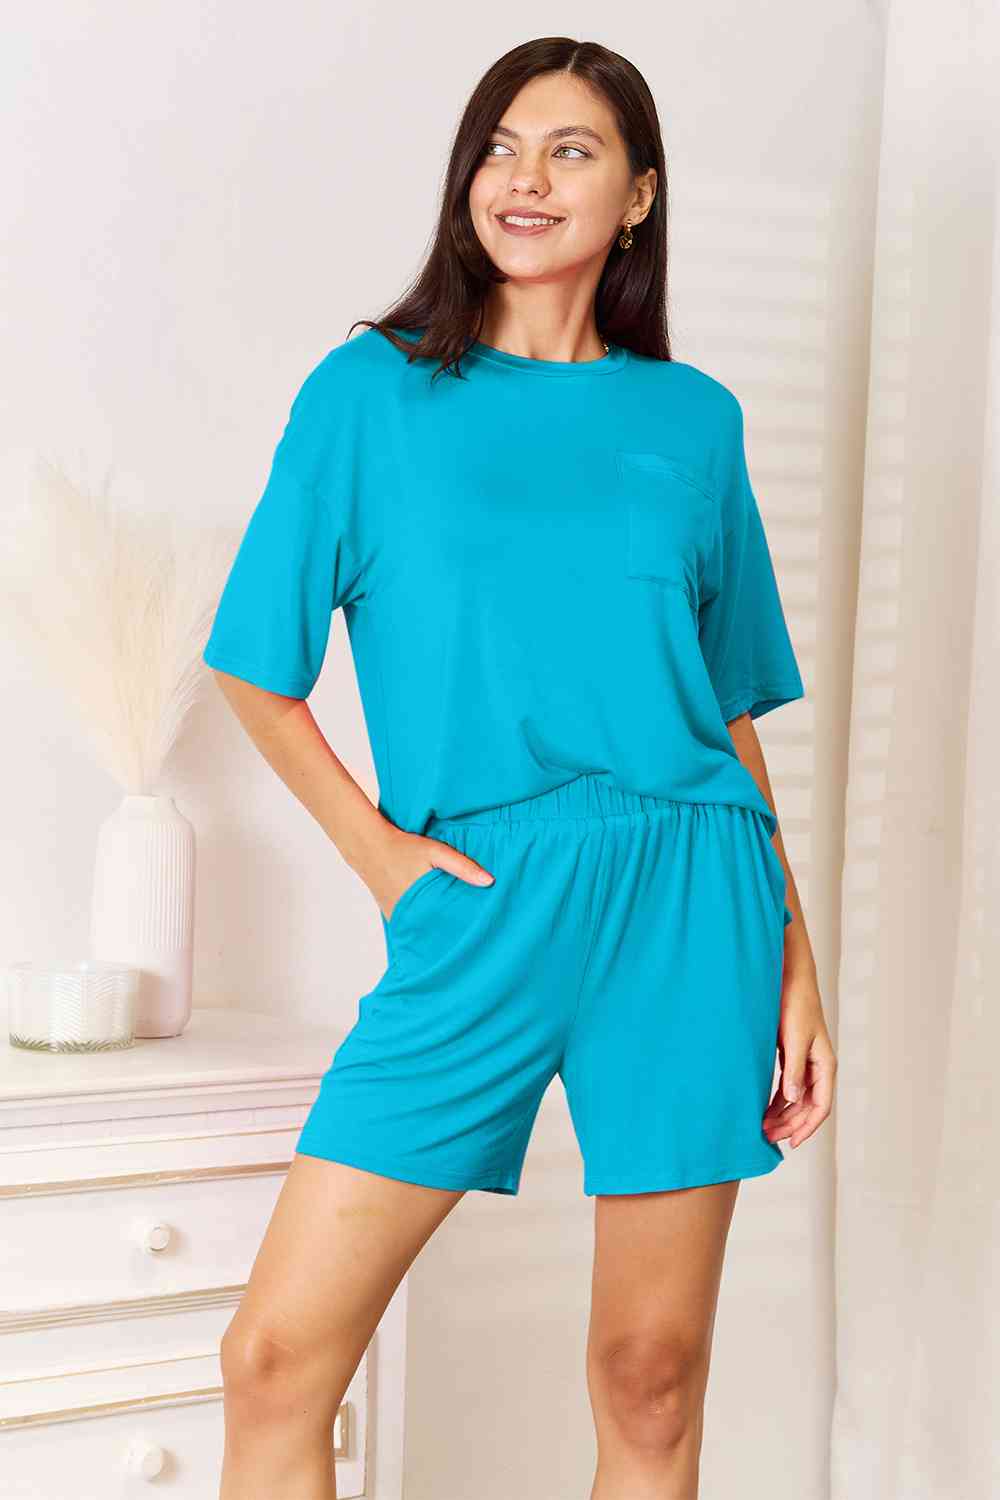 Soft Rayon Half Sleeve Top and Shorts Set - Sky Blue / S - Camis & Tops - Outfit Sets - 1 - 2024